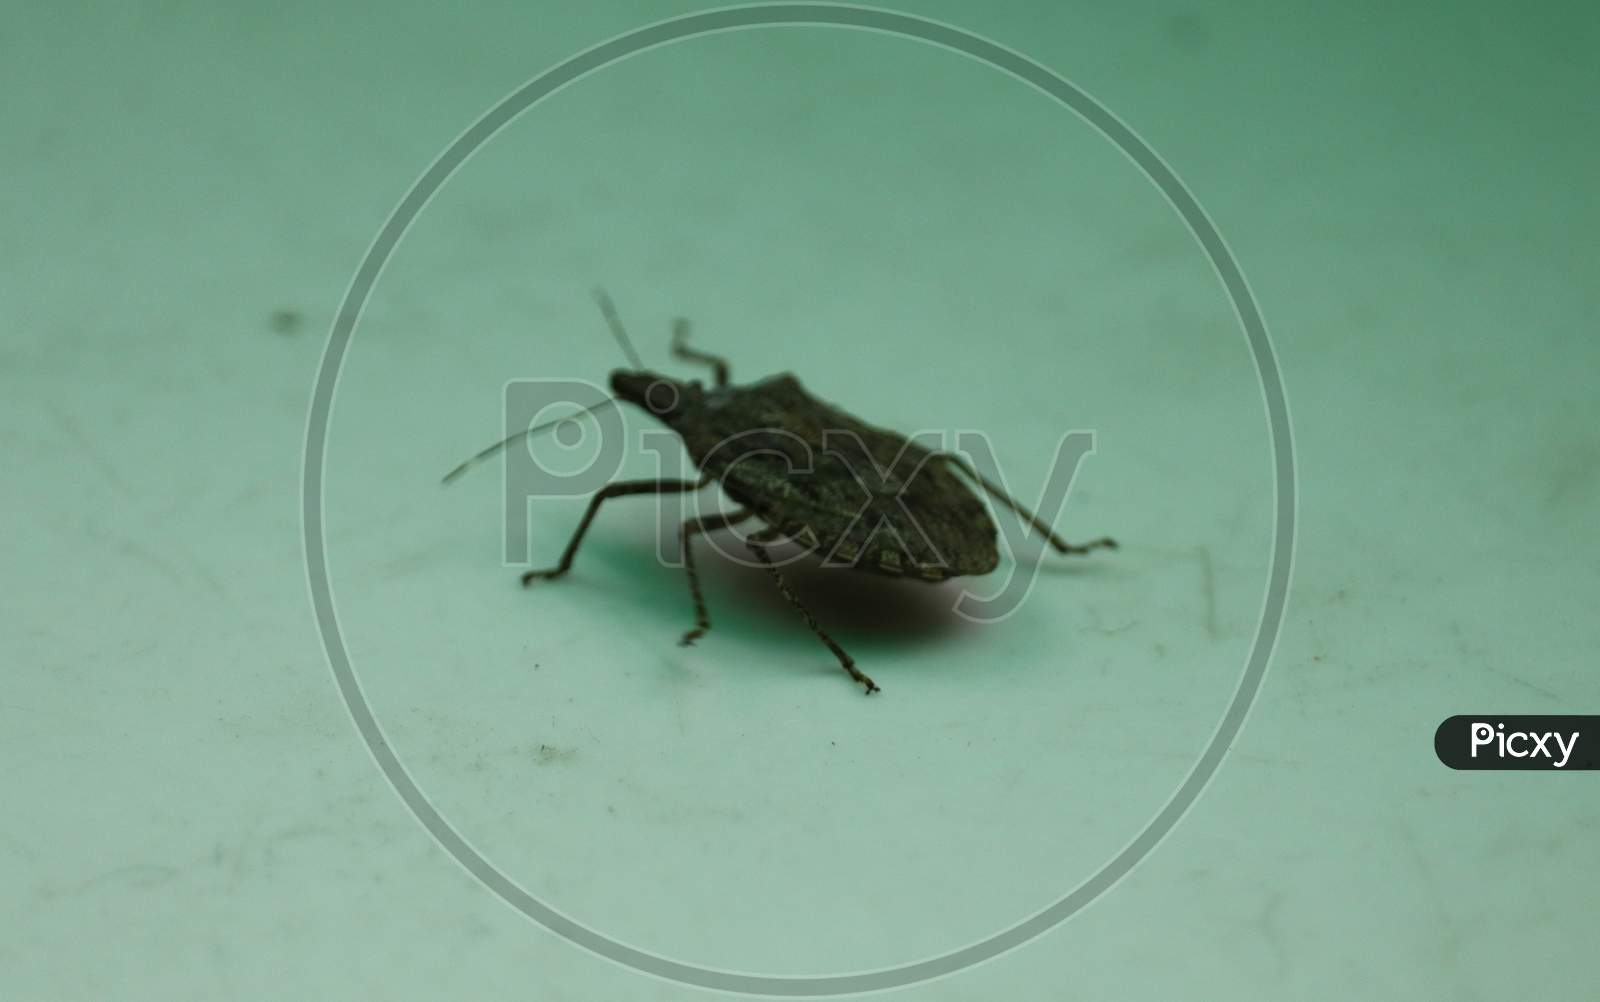 Stink Bug Crawling On The Floor